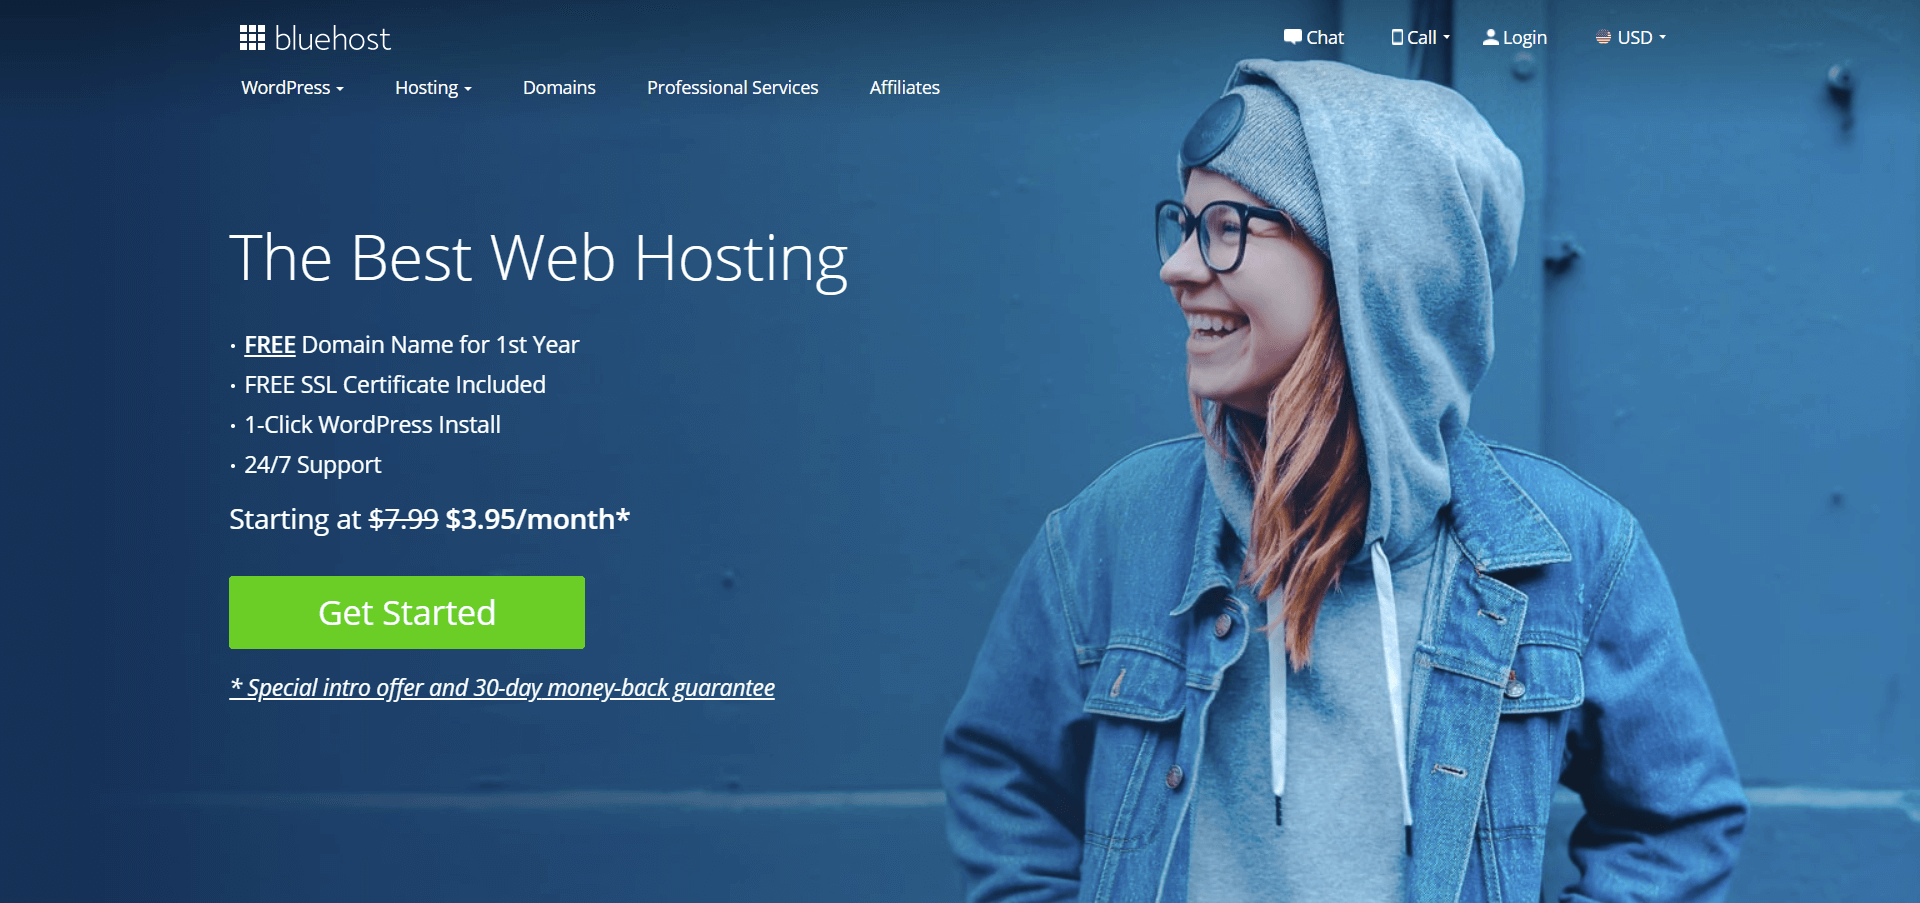 best web hosting for small business, best web hosting 2019, best web hosting for WordPress, web hosting comparison, SaaS blog, All That SaaS